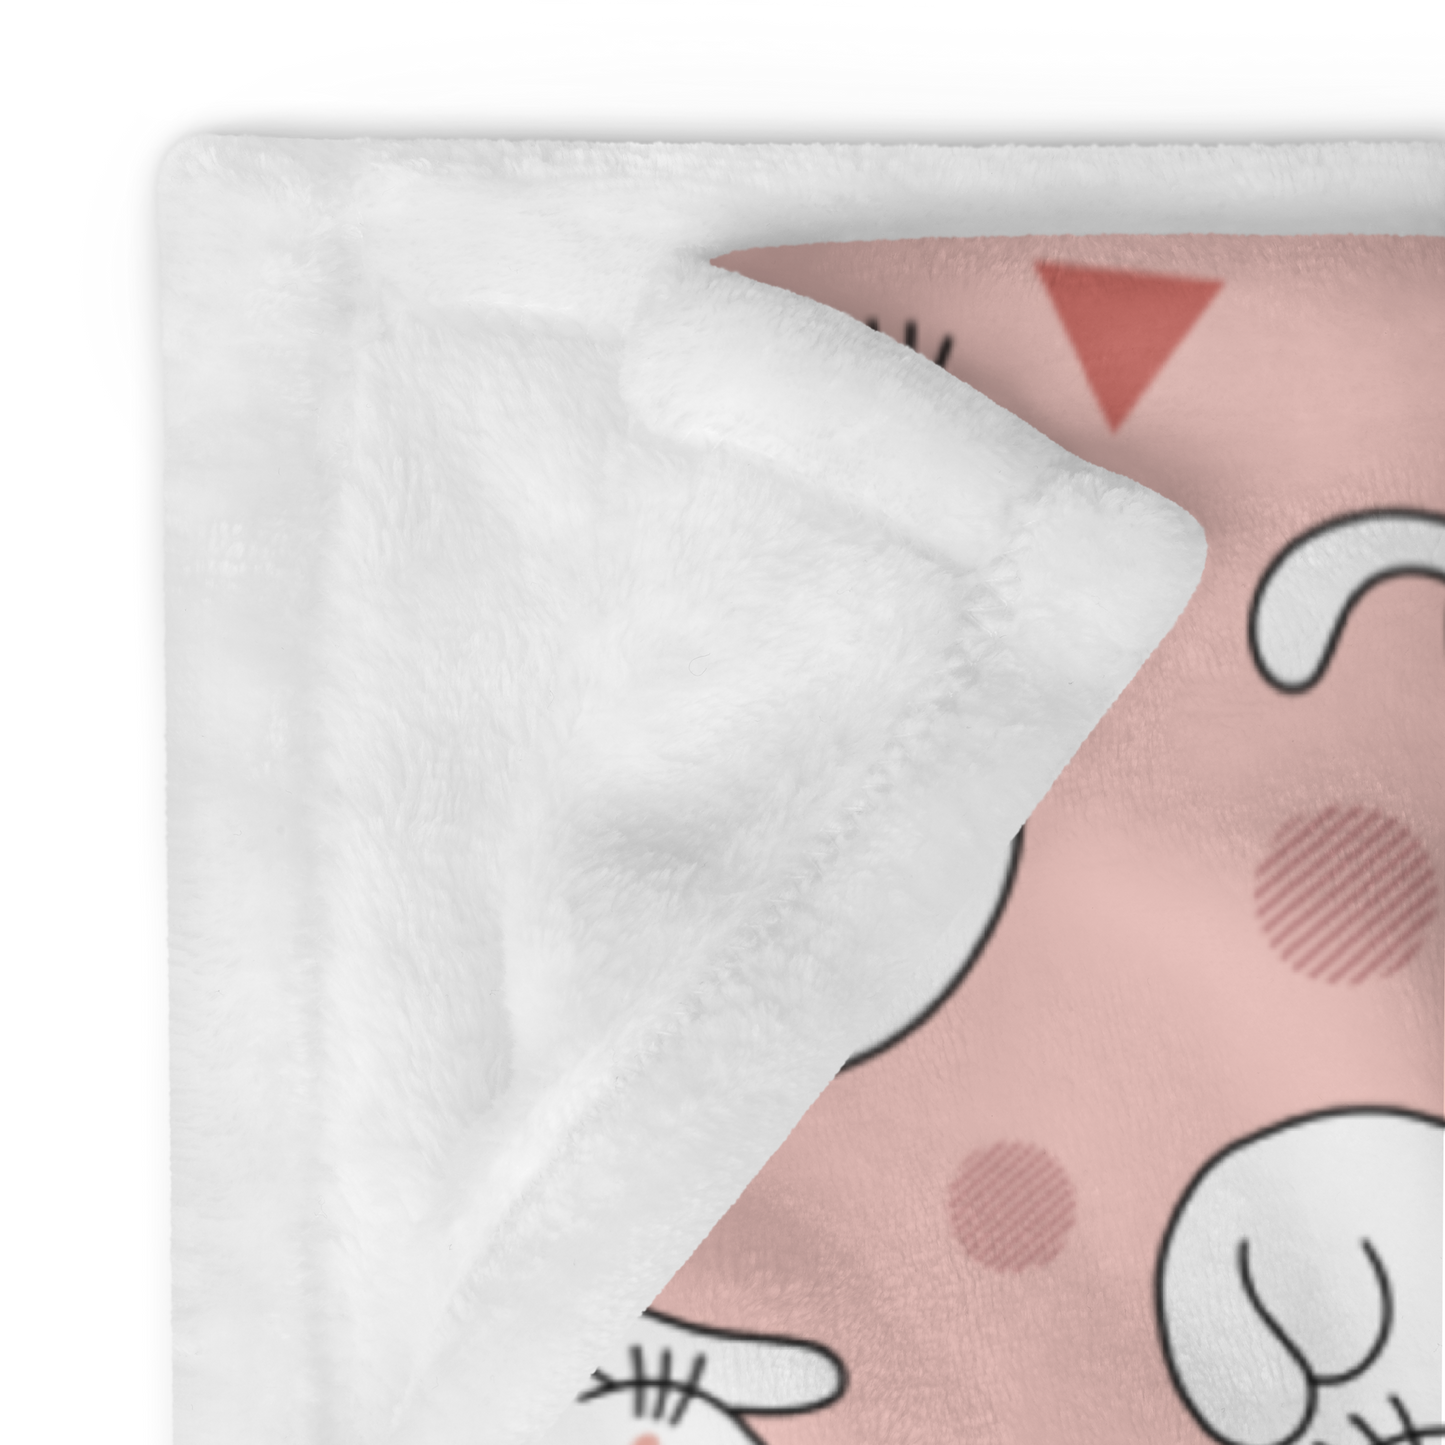 Throw Blanket | Cute White Cat Themed with Pink Background